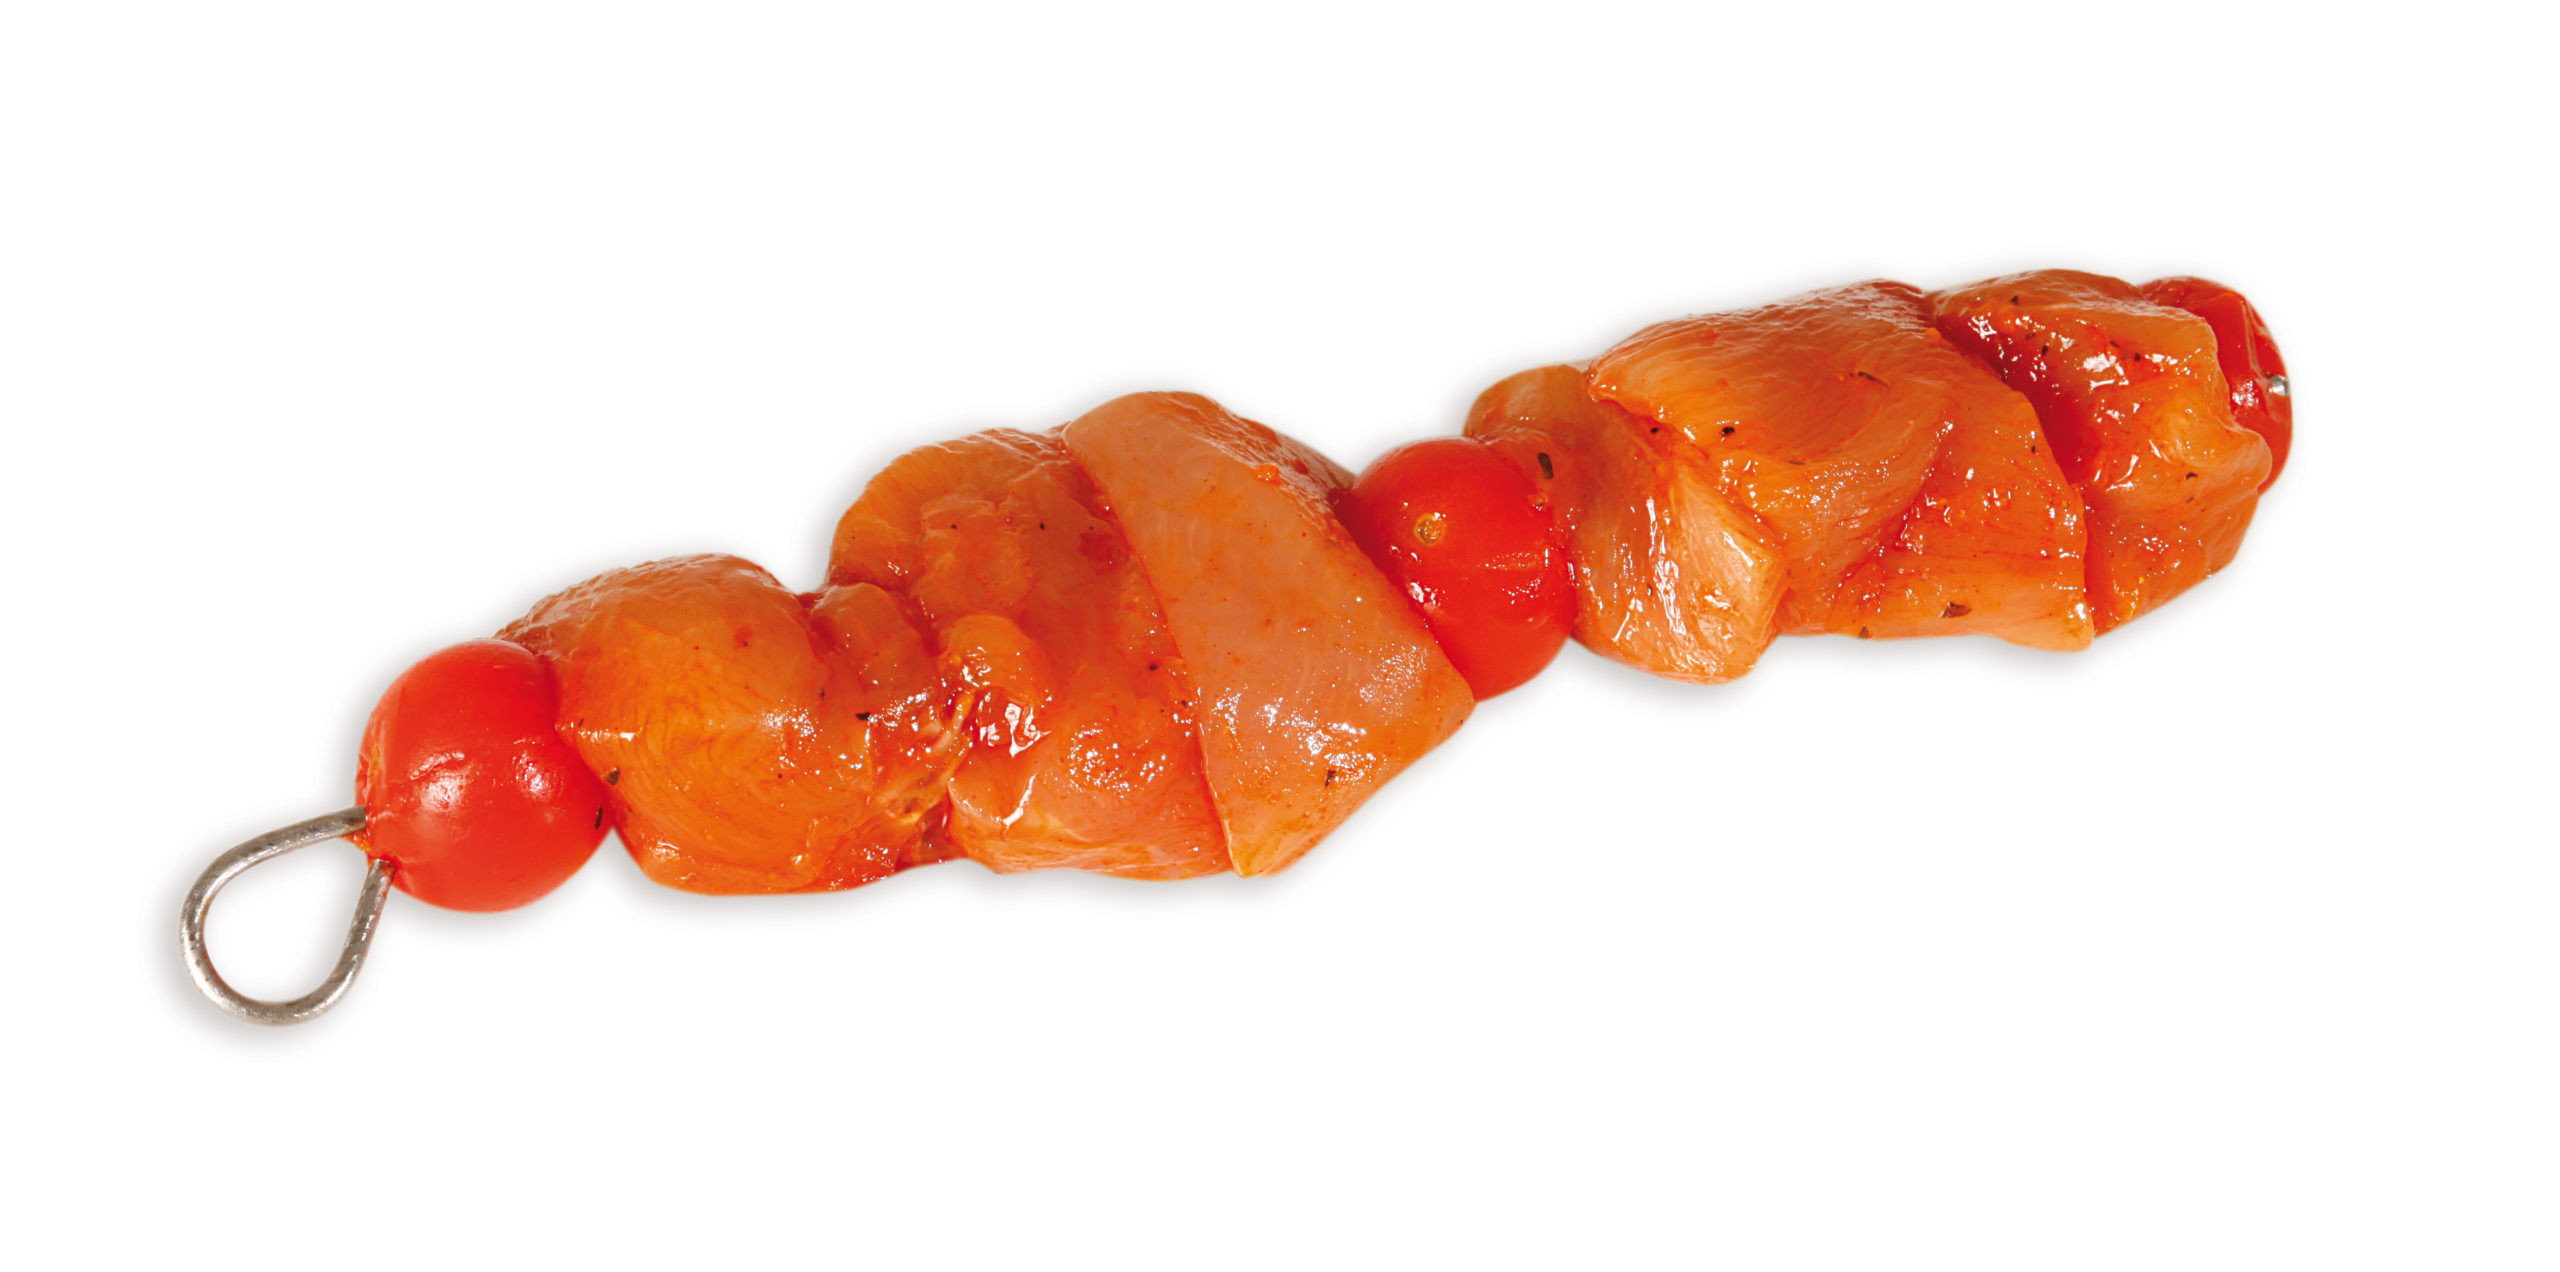 Chicken fillet skewer with Provençal marinated cherry tomatoes, Délices & Gastronomie - Volatys